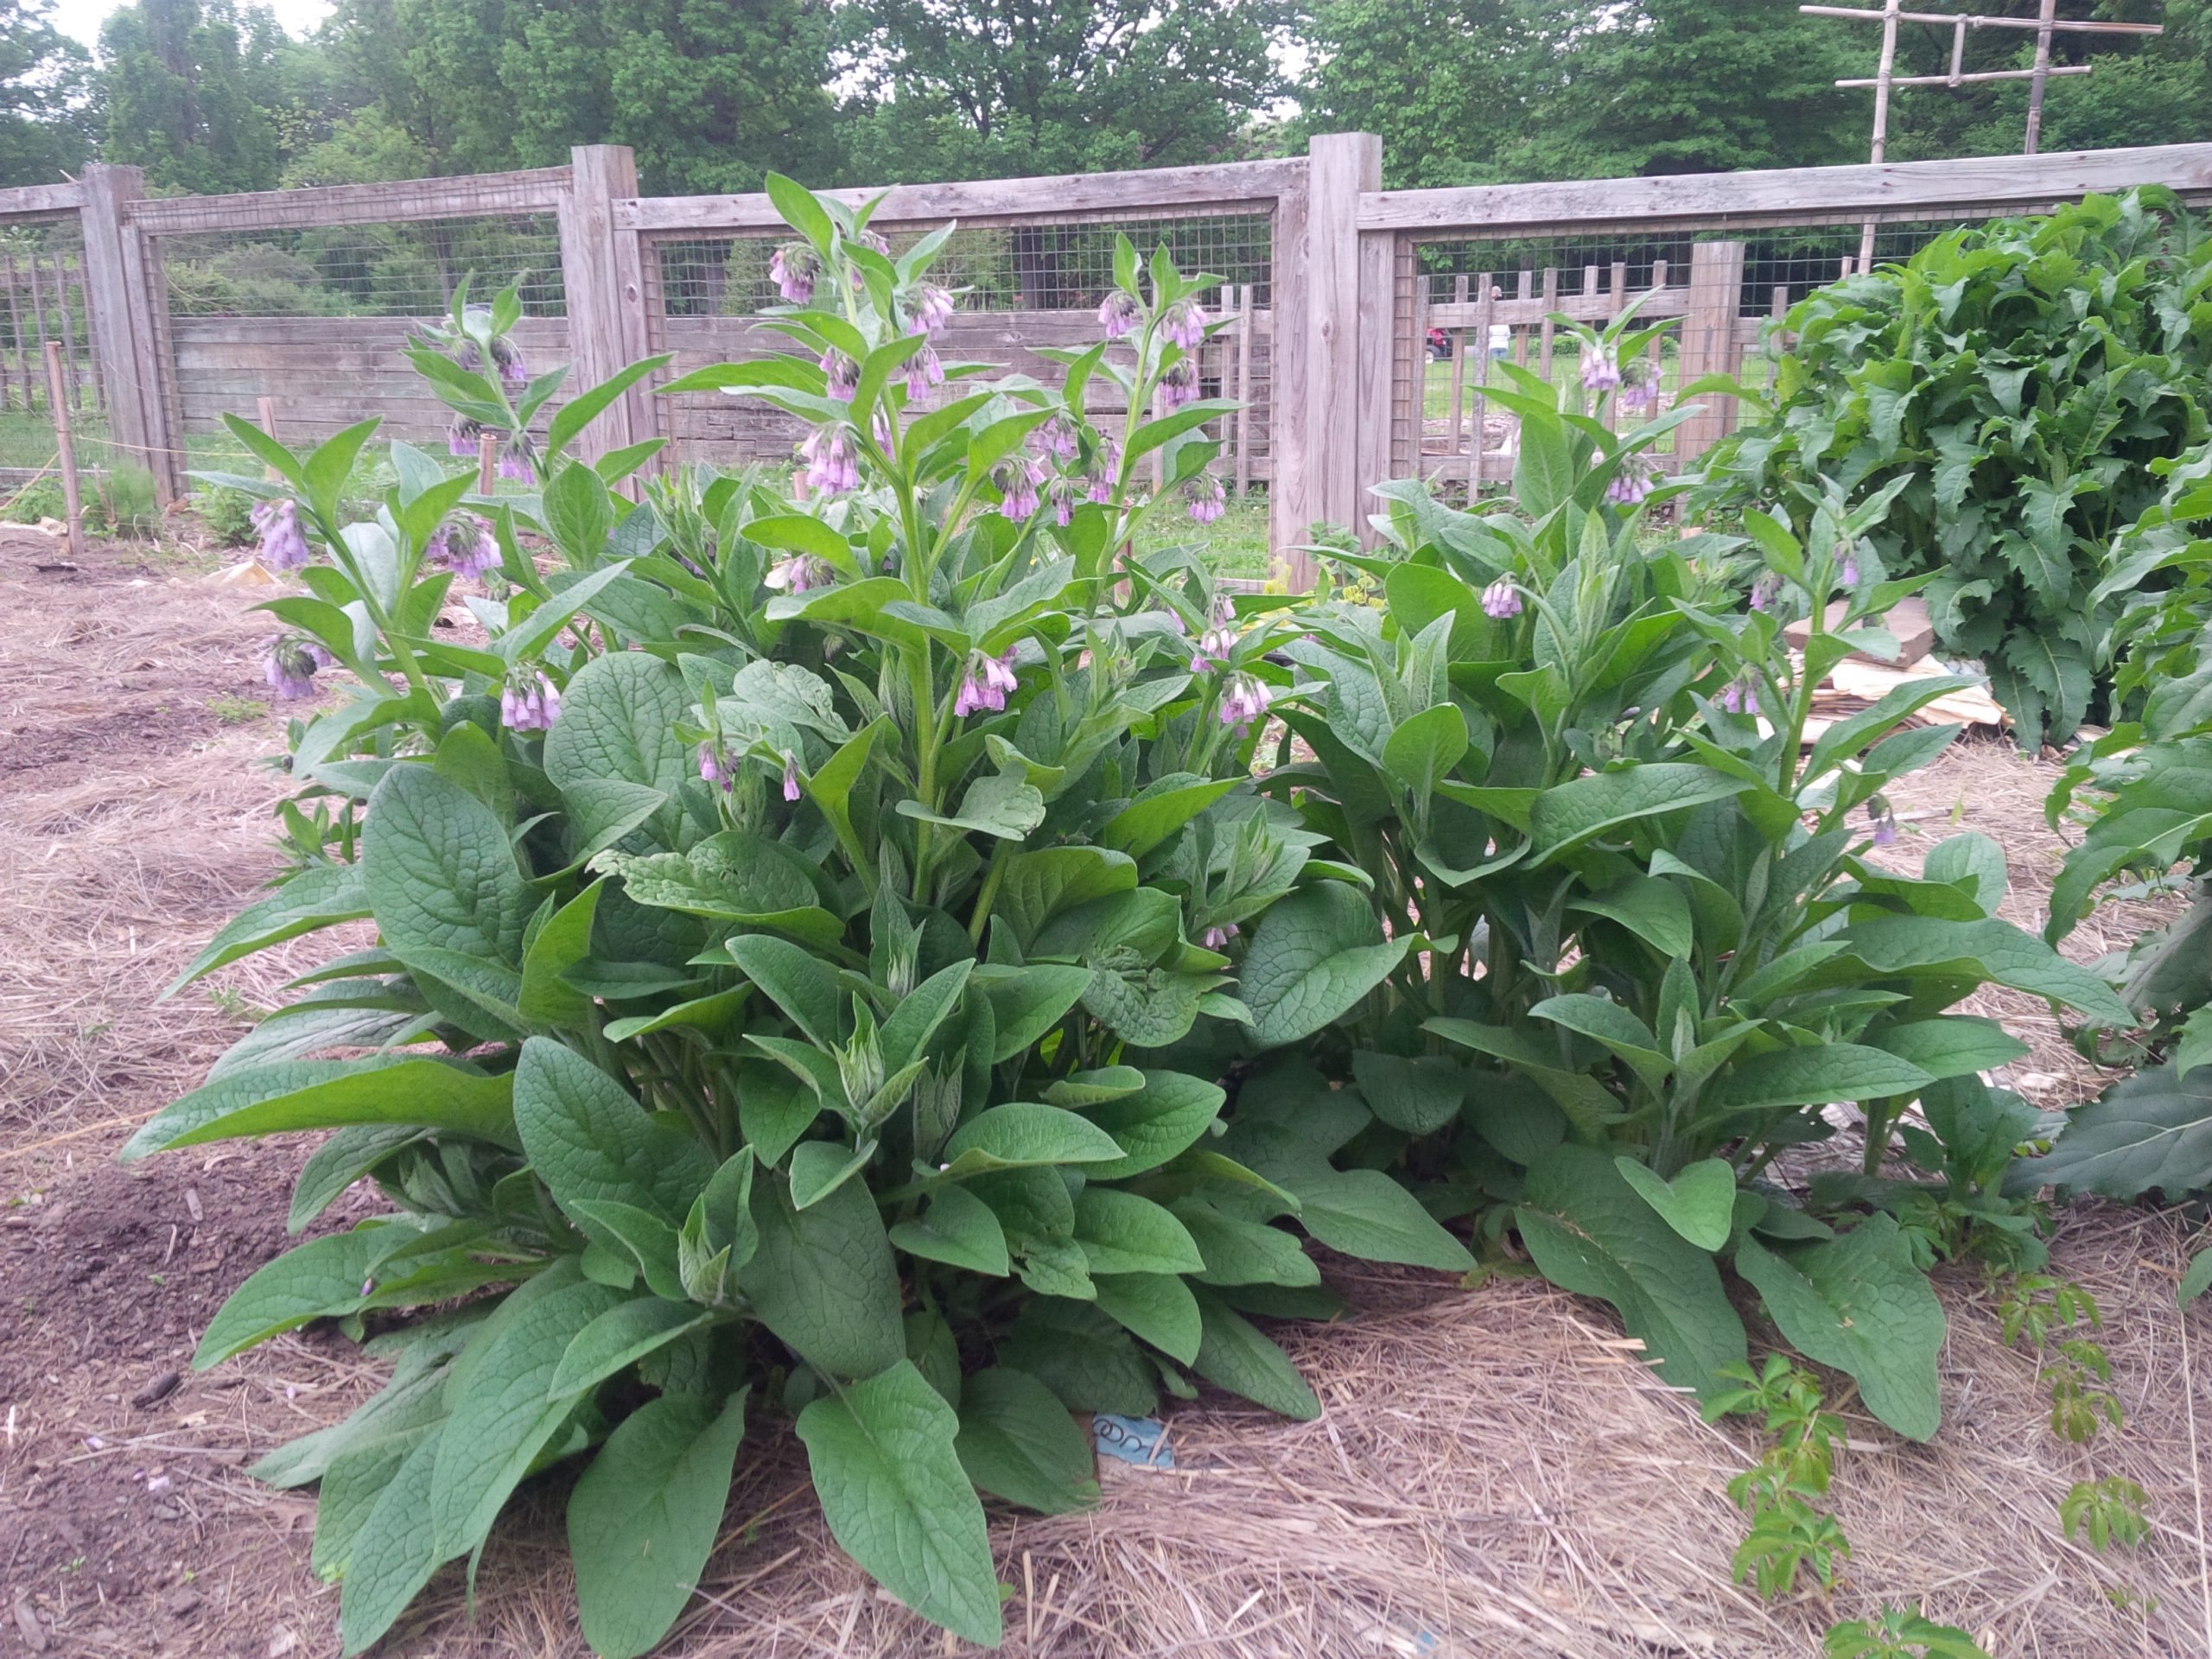 Comfrey – Advice From The Herb Lady